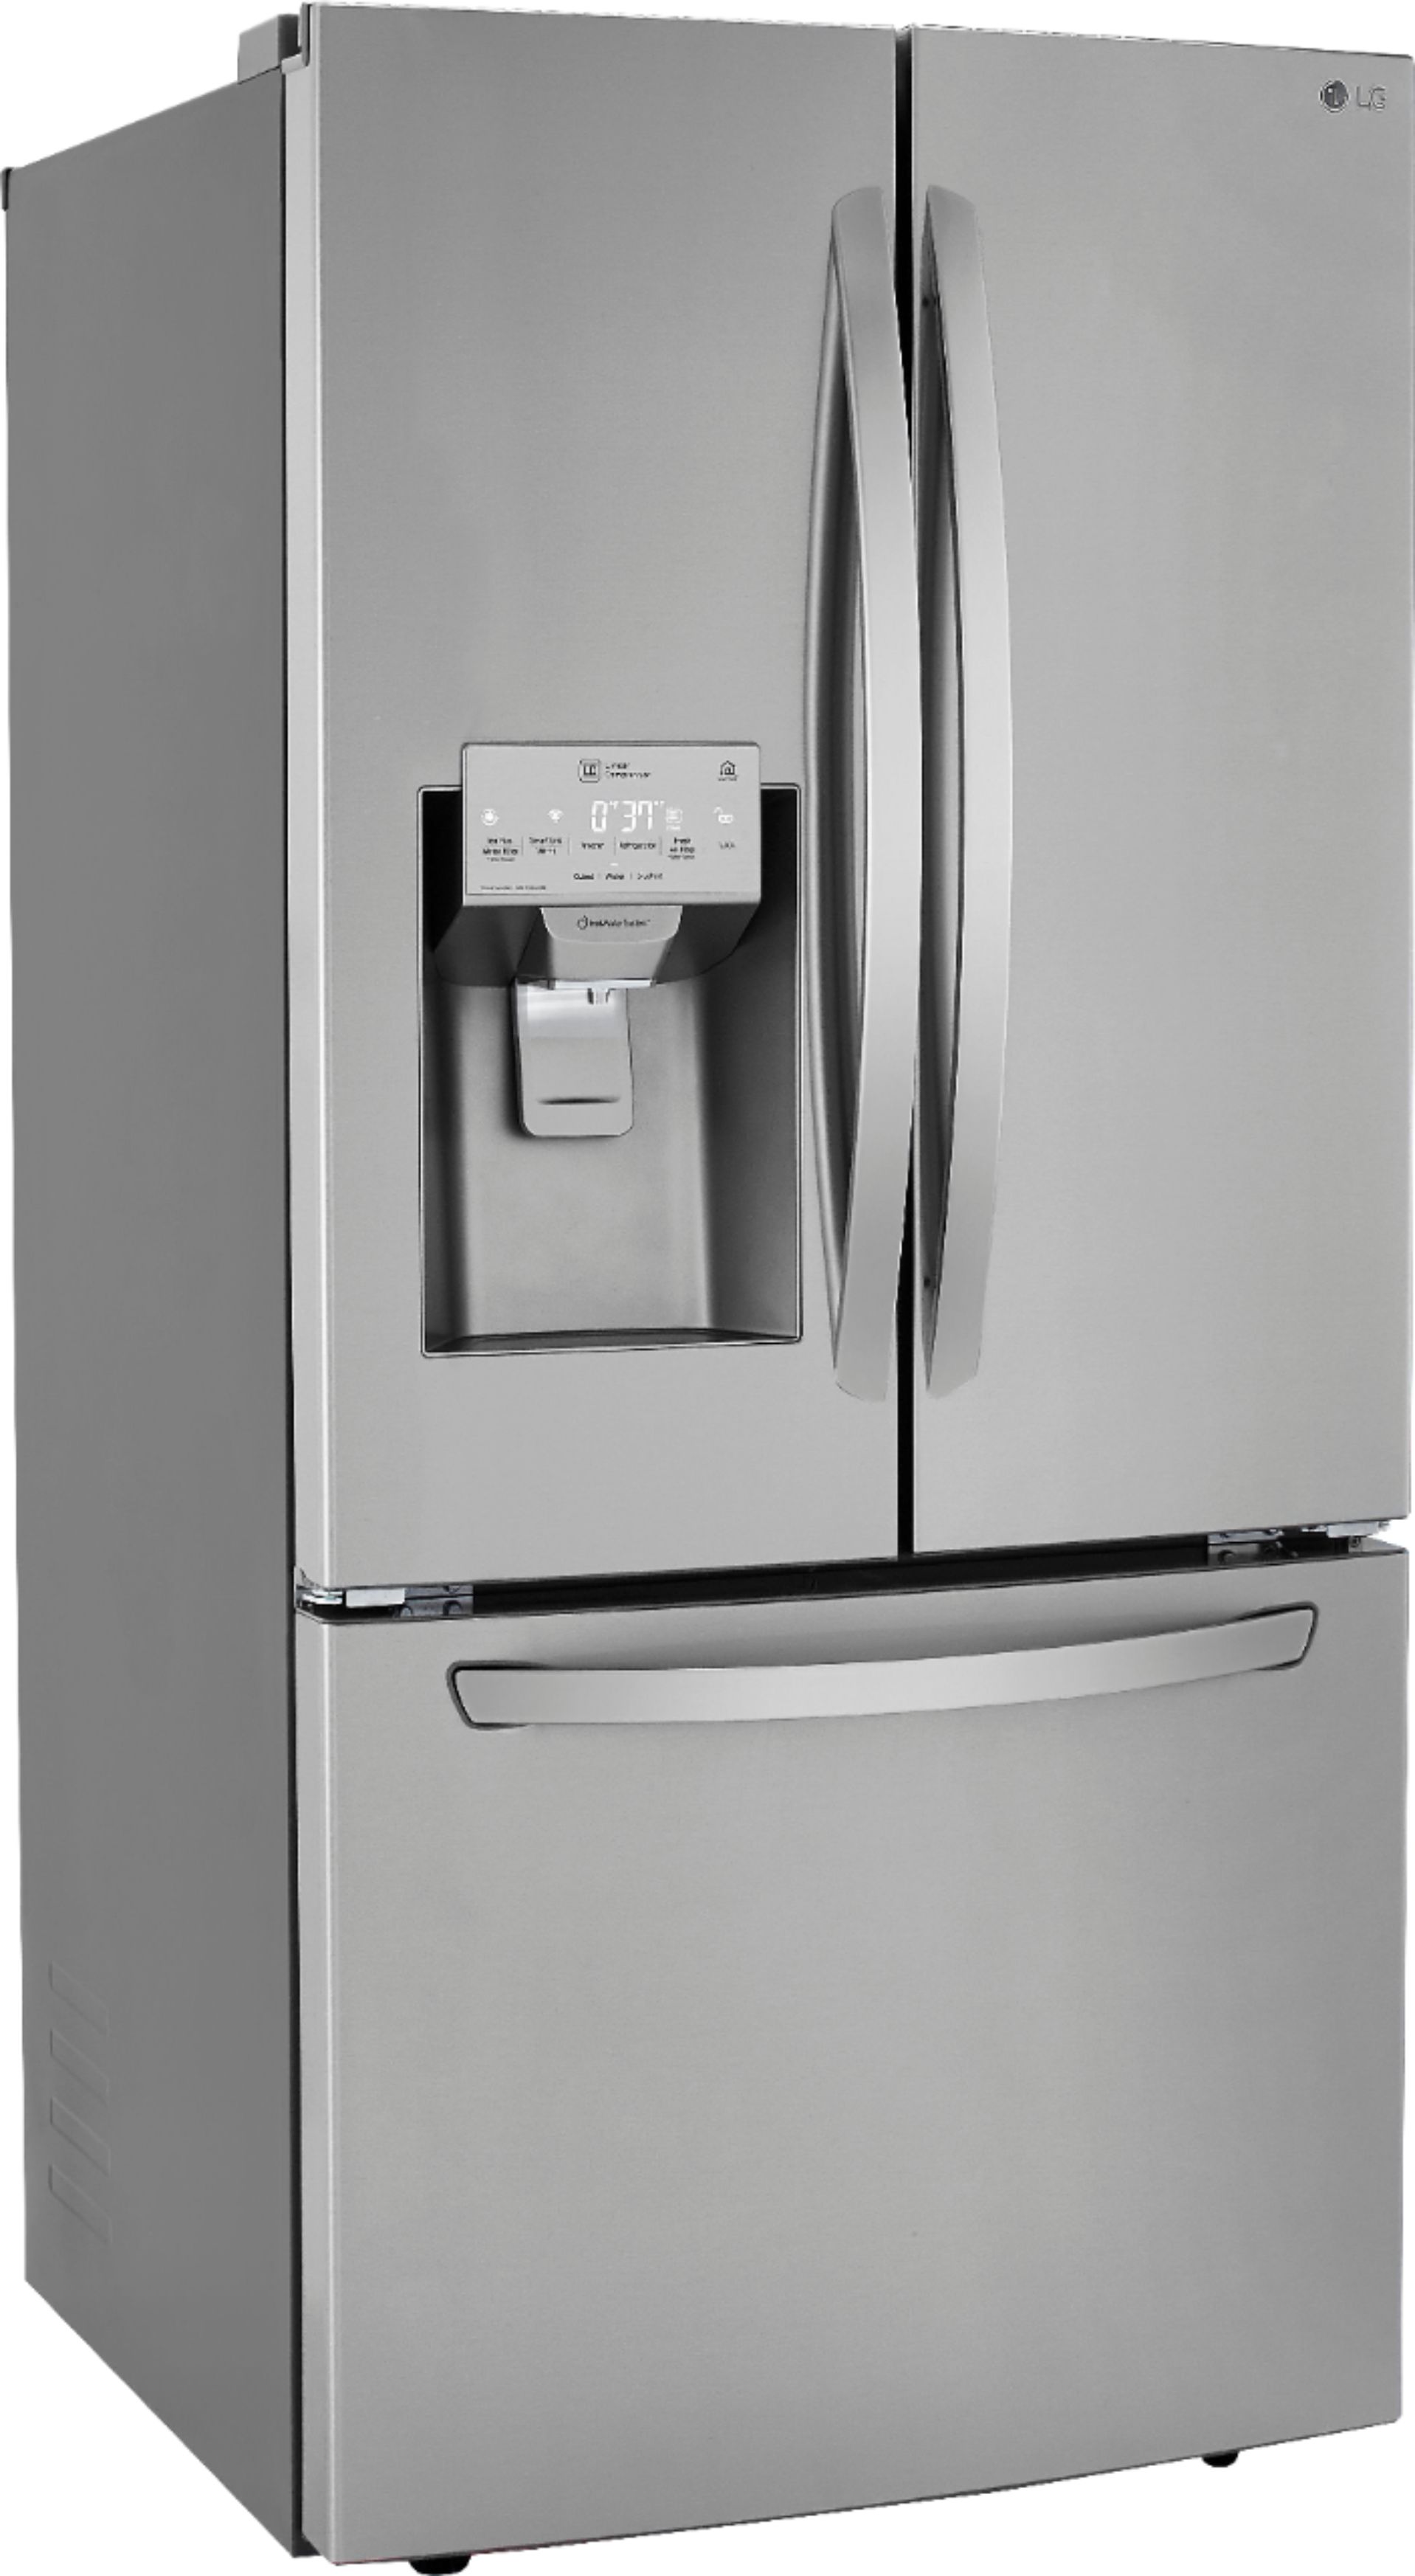 Angle View: Viking - 7 Series 16.4 Cu. Ft. Built-In Refrigerator - Custom Panel Ready